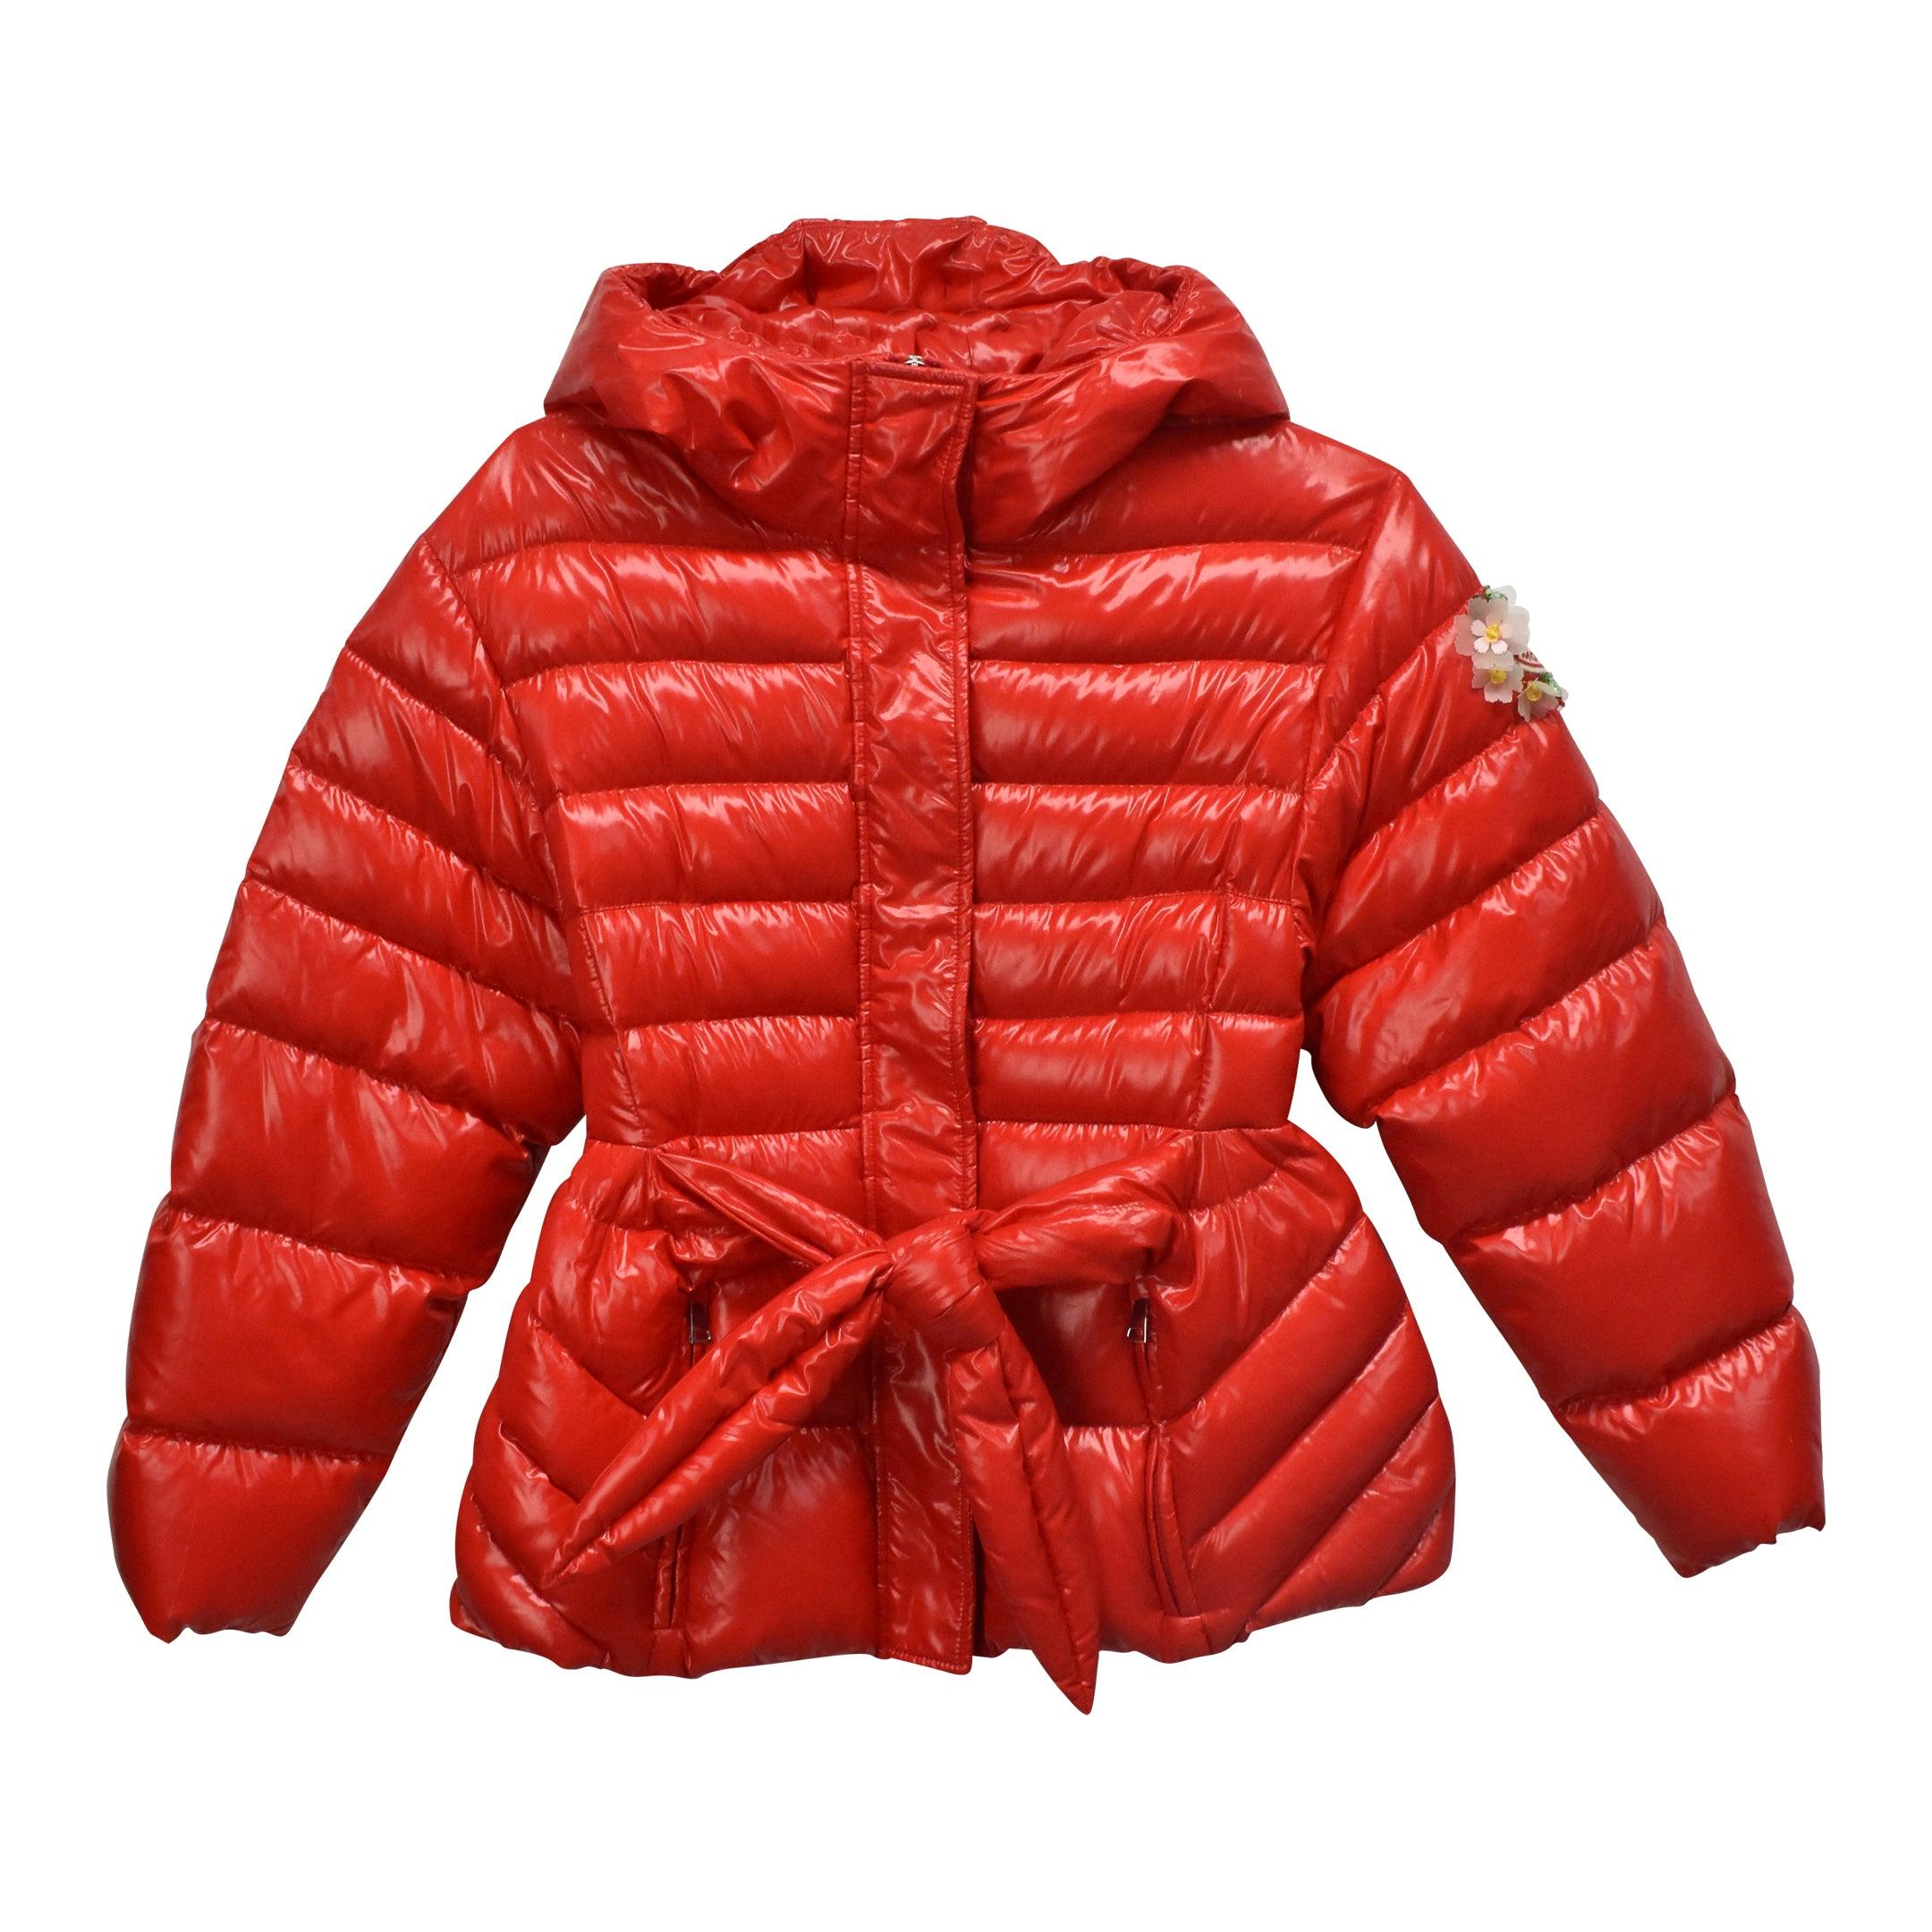 Moncler x Simone Rocha 'Lolly' Puffer Jacket - Women's 0 - Fashionably Yours